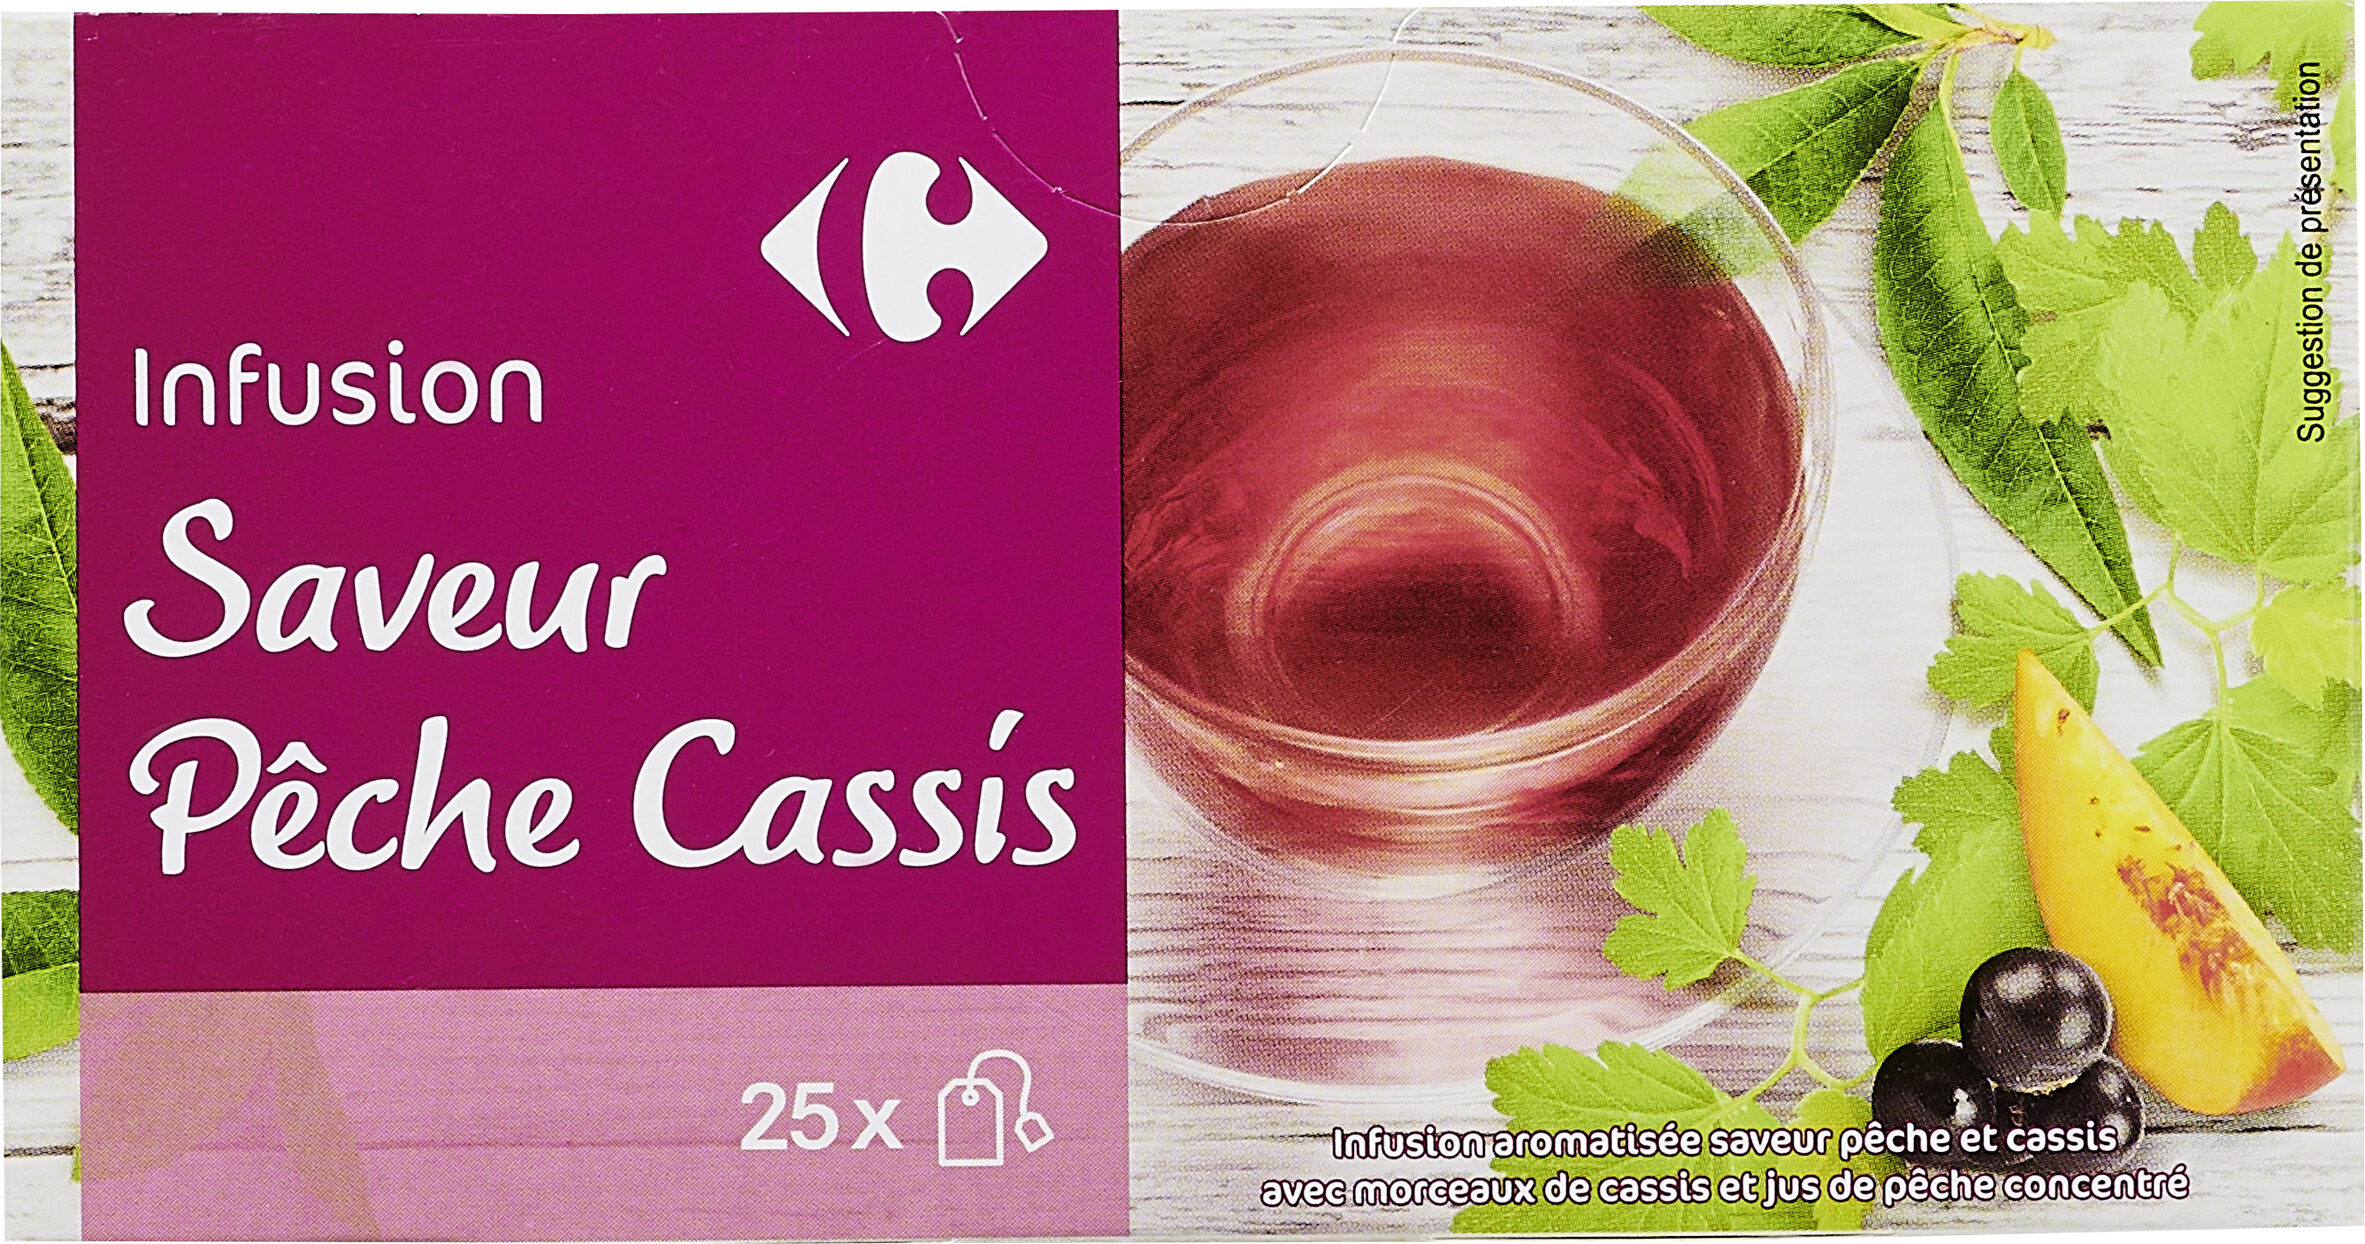 Infusion saveur pêche cassis - Prodotto - fr